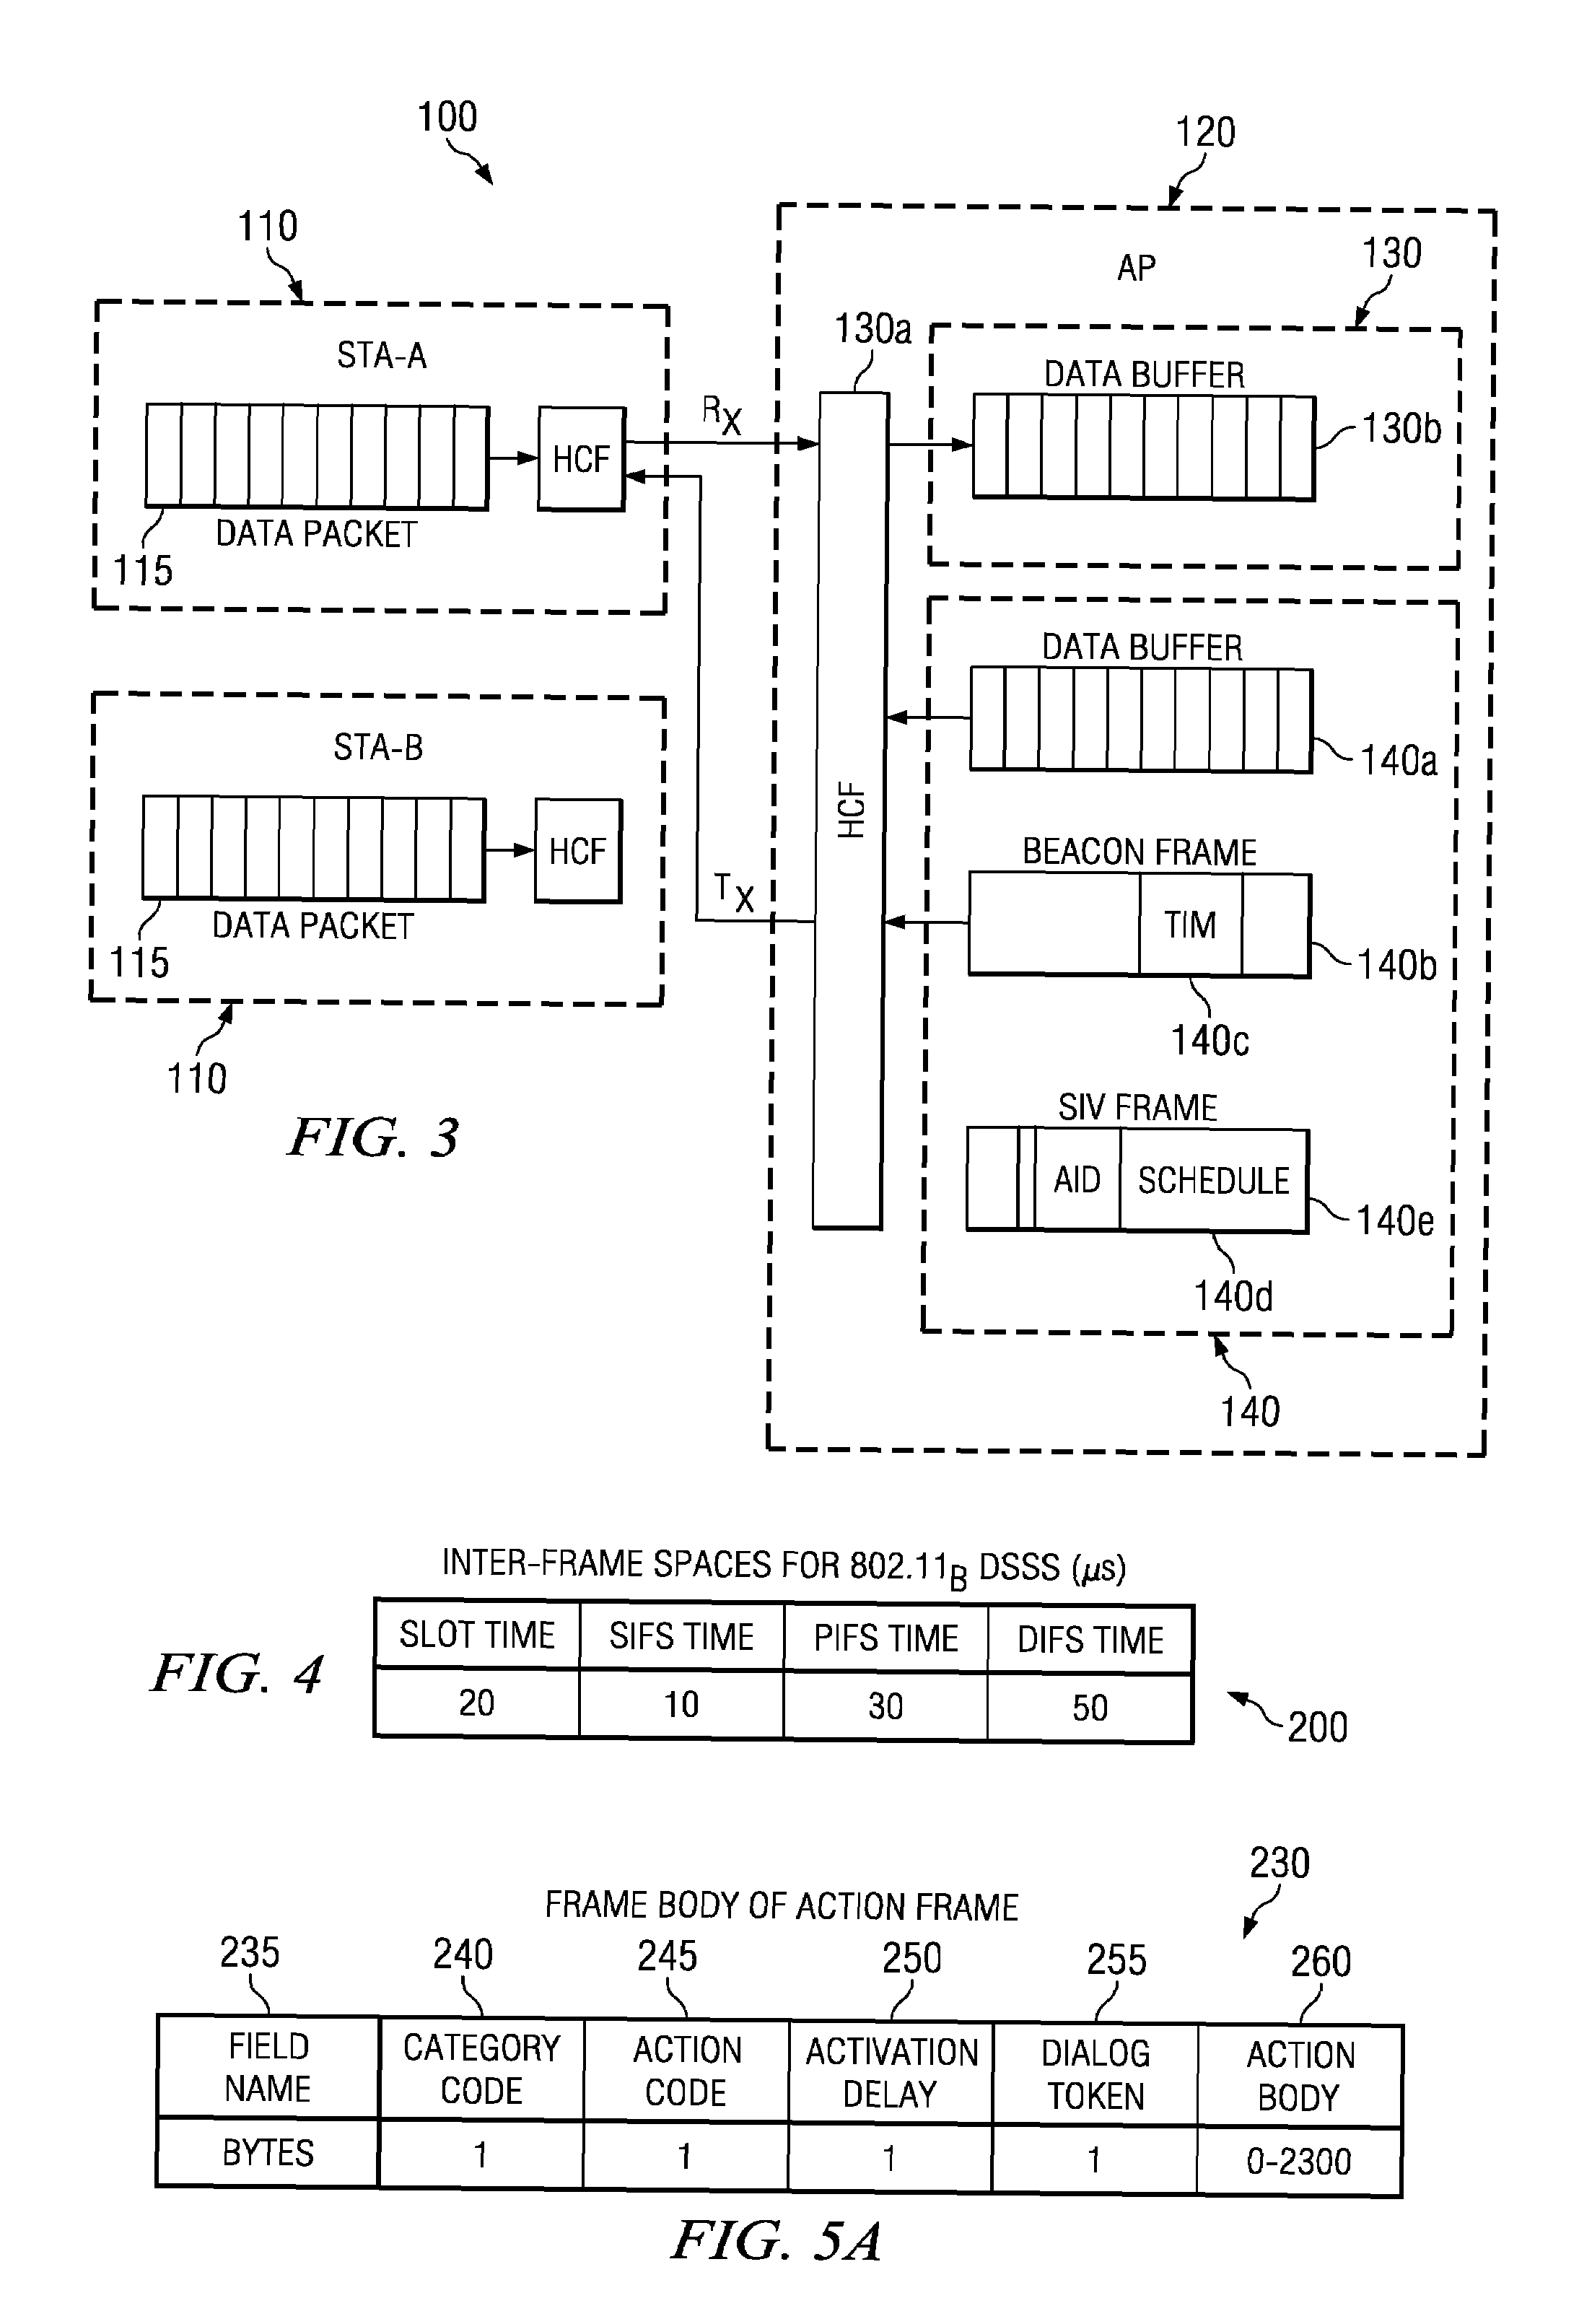 System and method for prioritizing data transmission and transmitting scheduled wake-up times to network stations based on downlink transmission duration